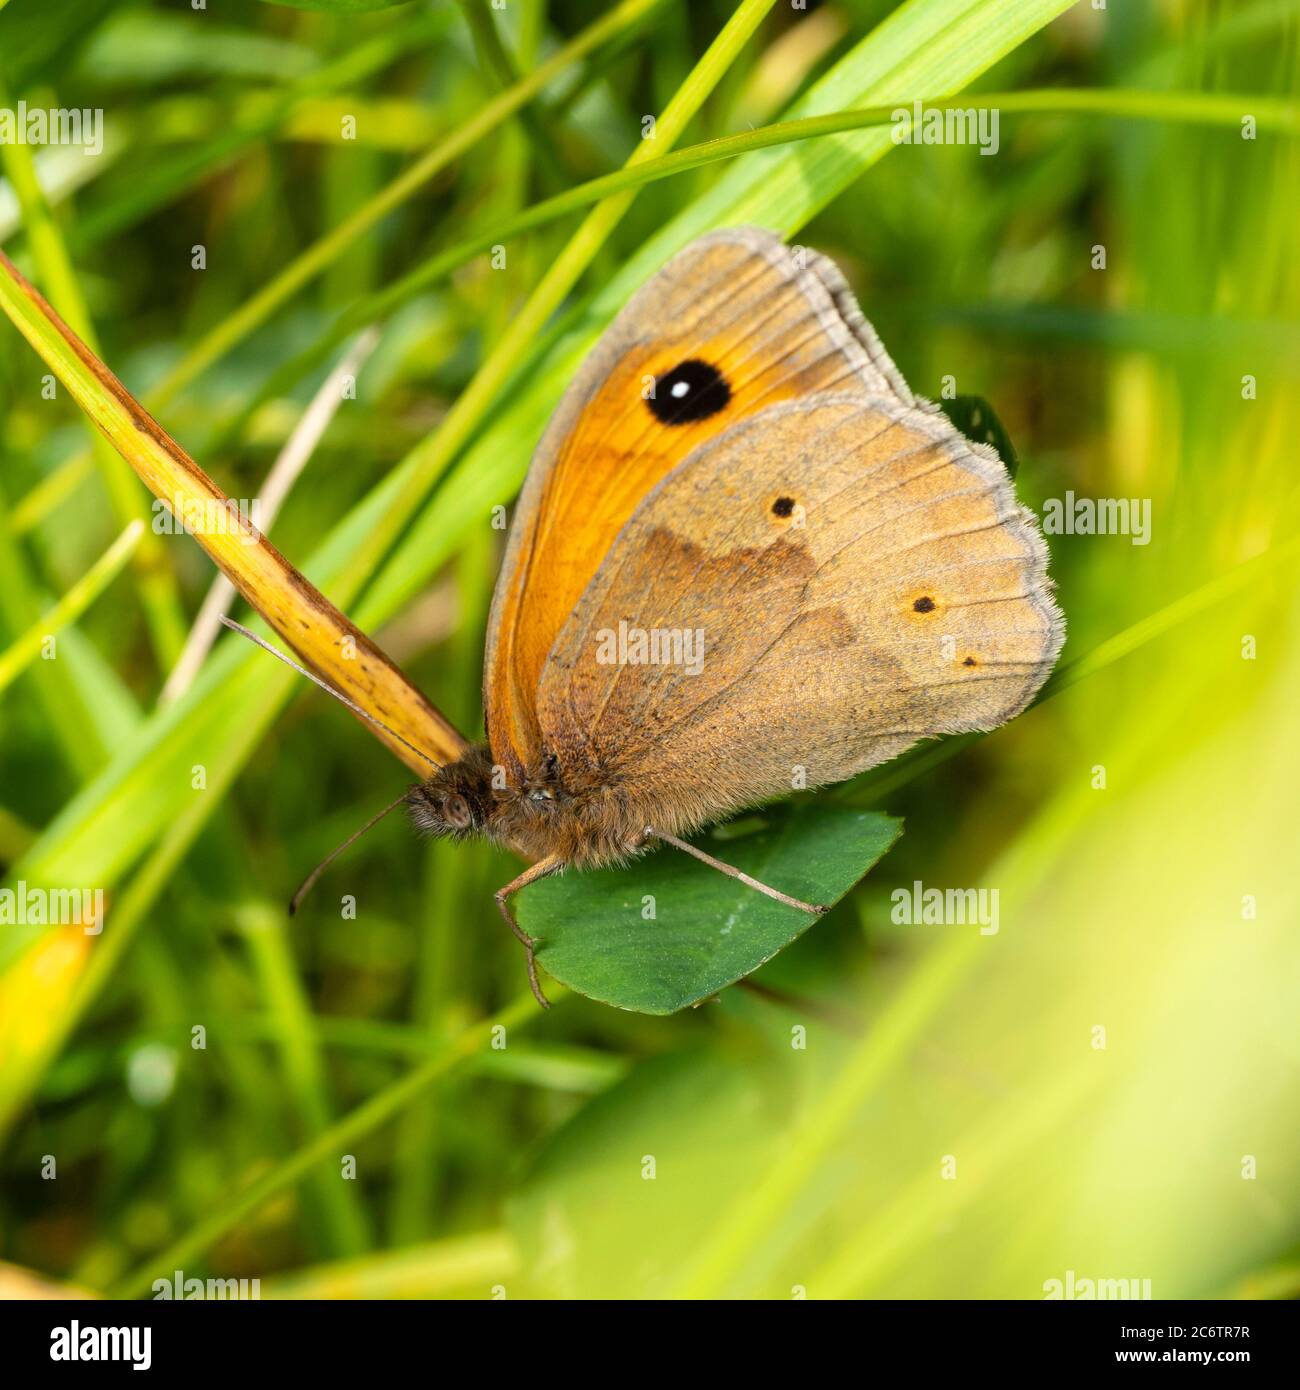 Resting pose of the UK native meadow brown butterfly, Maniola jurtina, showing the underwing eyespots Stock Photo